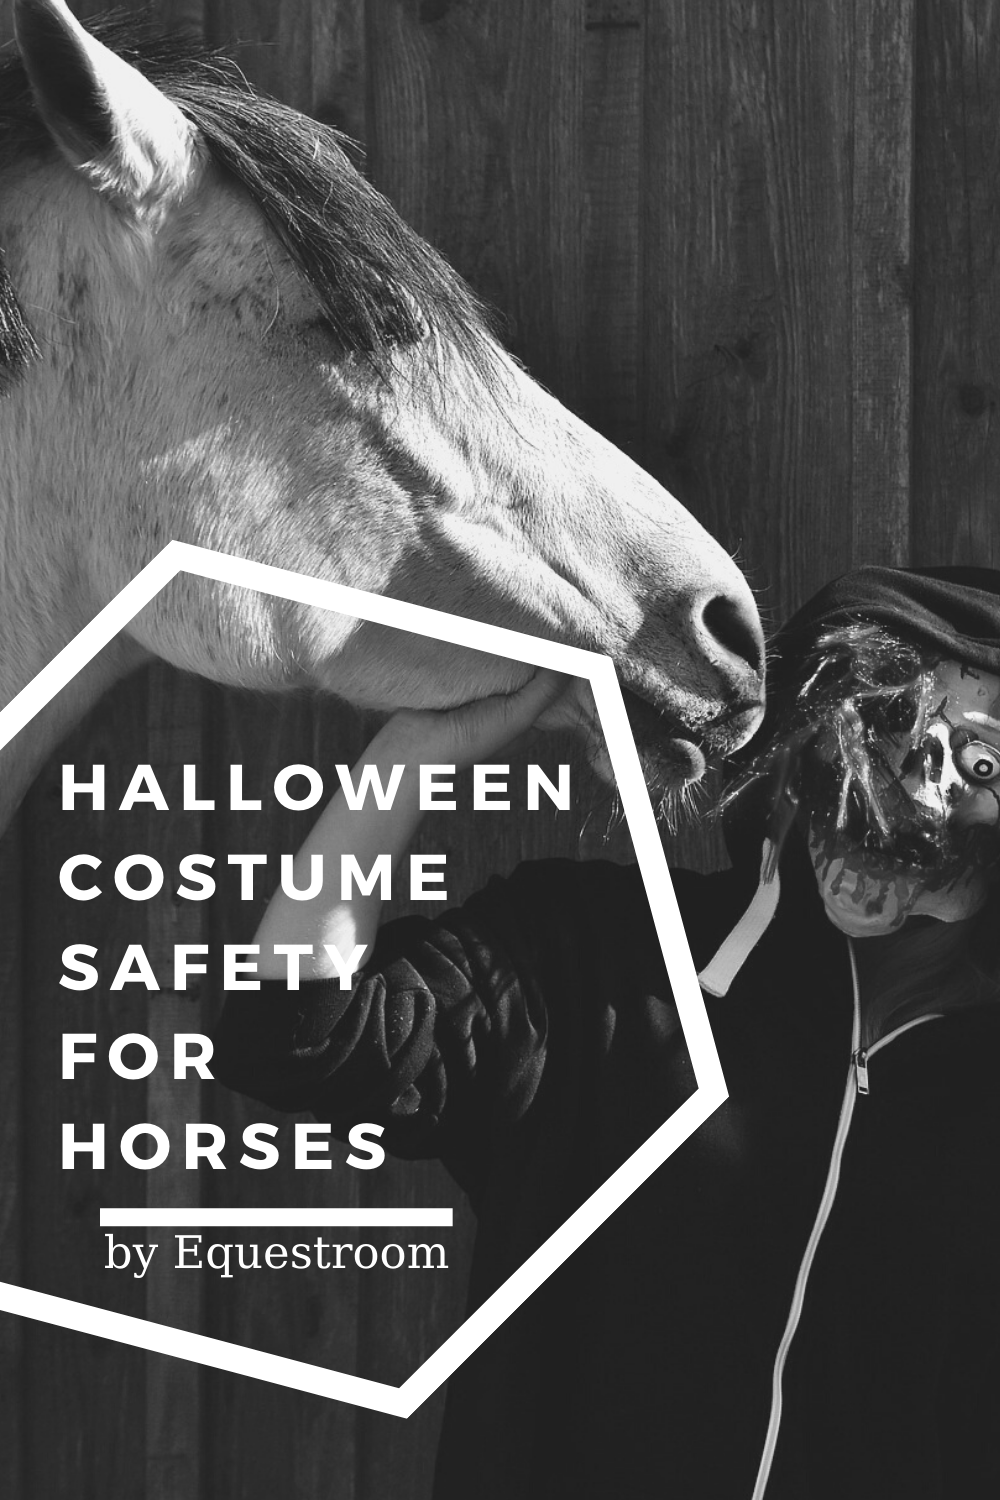 HALLOWEEN COSTUME SAFETY FOR HORSES